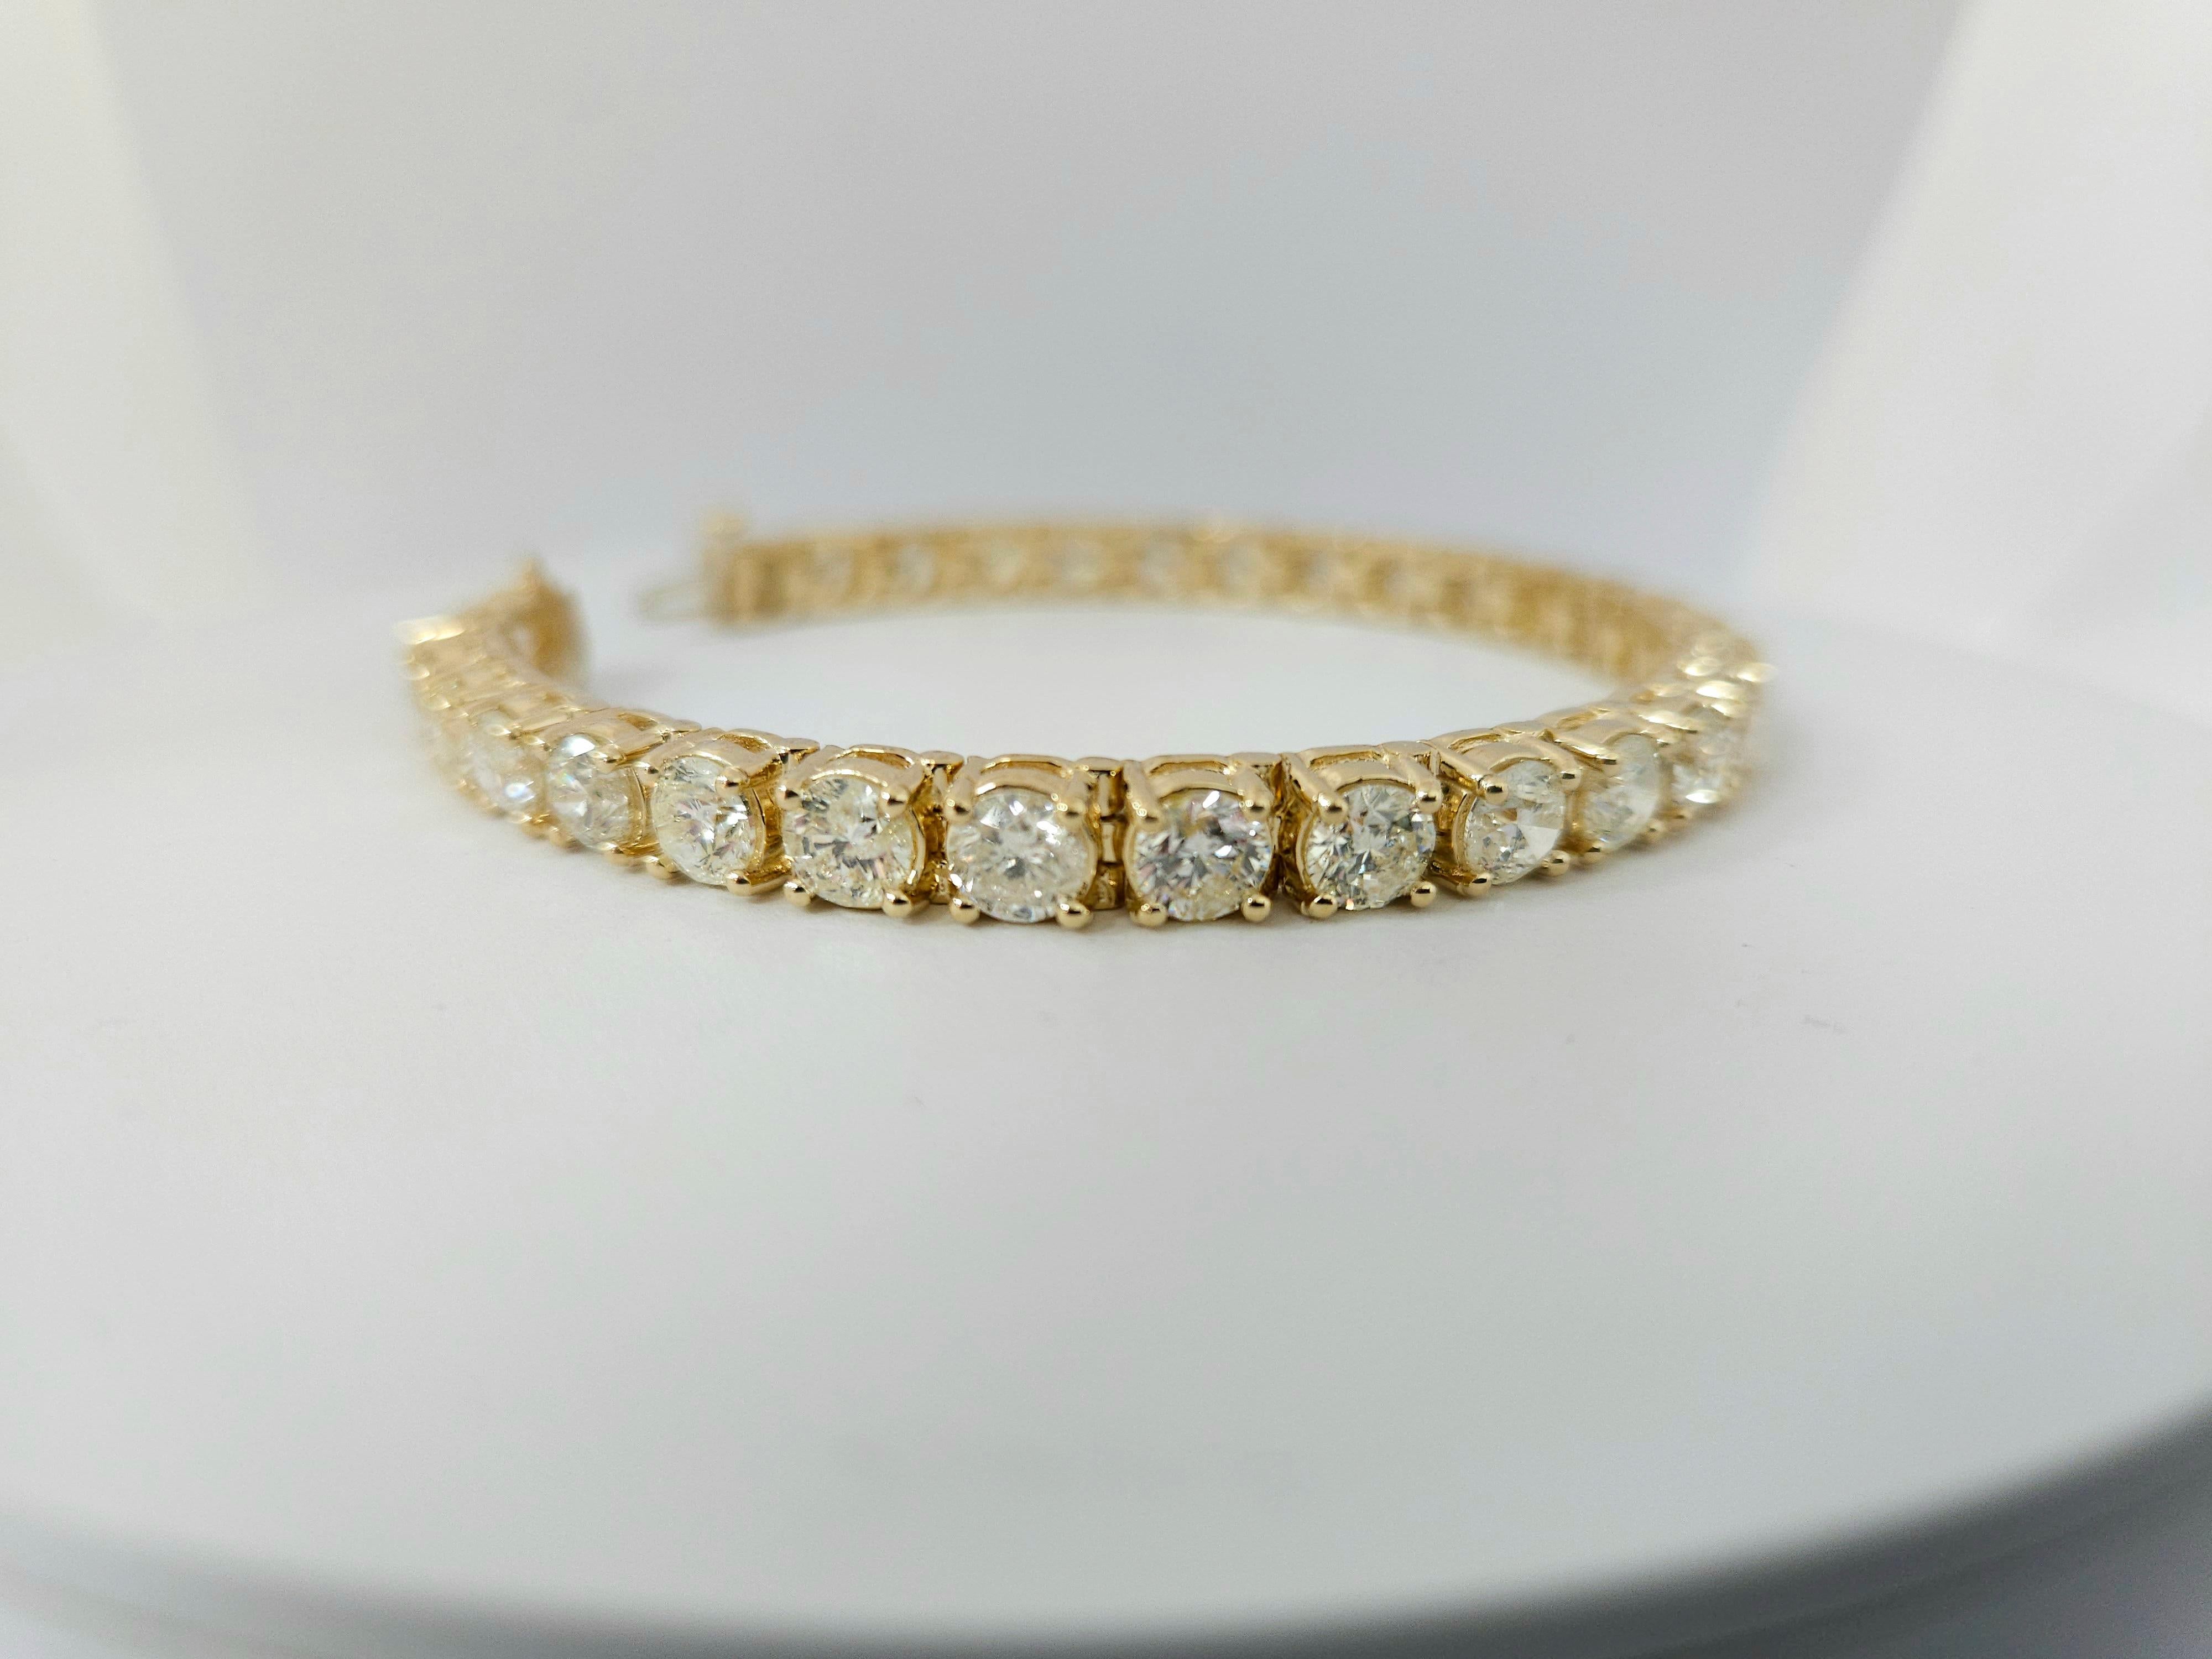 Natural diamonds tennis bracelet round-brilliant cut  14k yellow gold. 
7 inch. Average Color I, Clarity SI, 5.60 mm wide,30 pcs, 22.75 grams very shiny don't miss.

*Free shipping within U.S*

